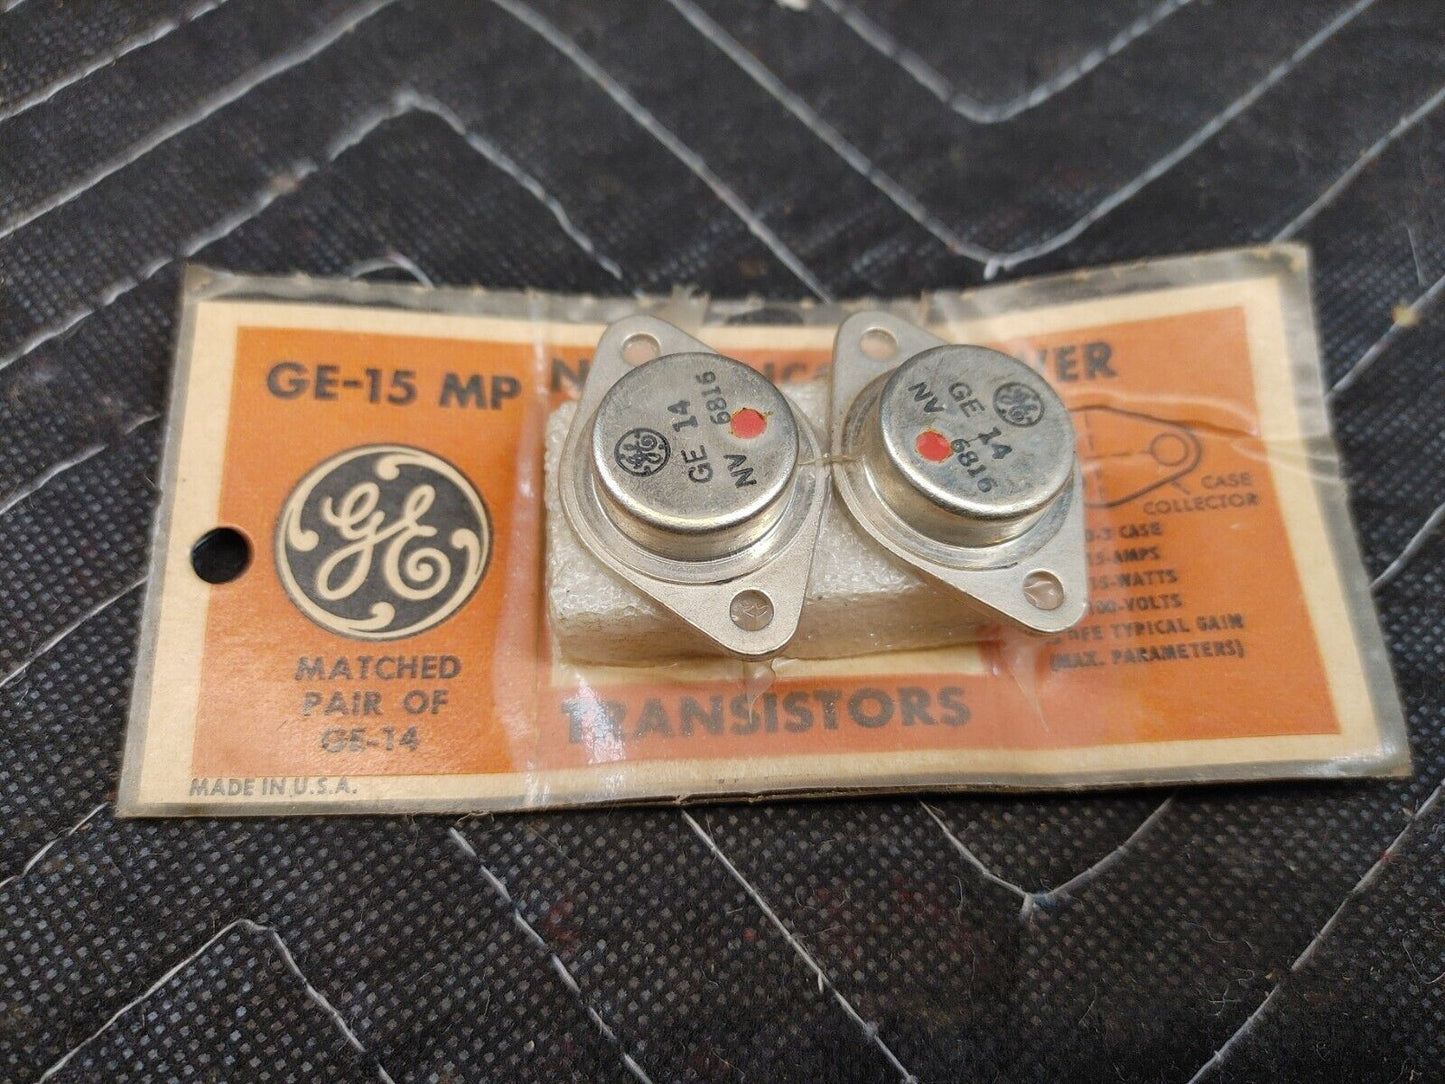 GE-15MP NPN SILICON POWER TRANSISTORS MATCHED PAIR OF GE-14 (NOS)